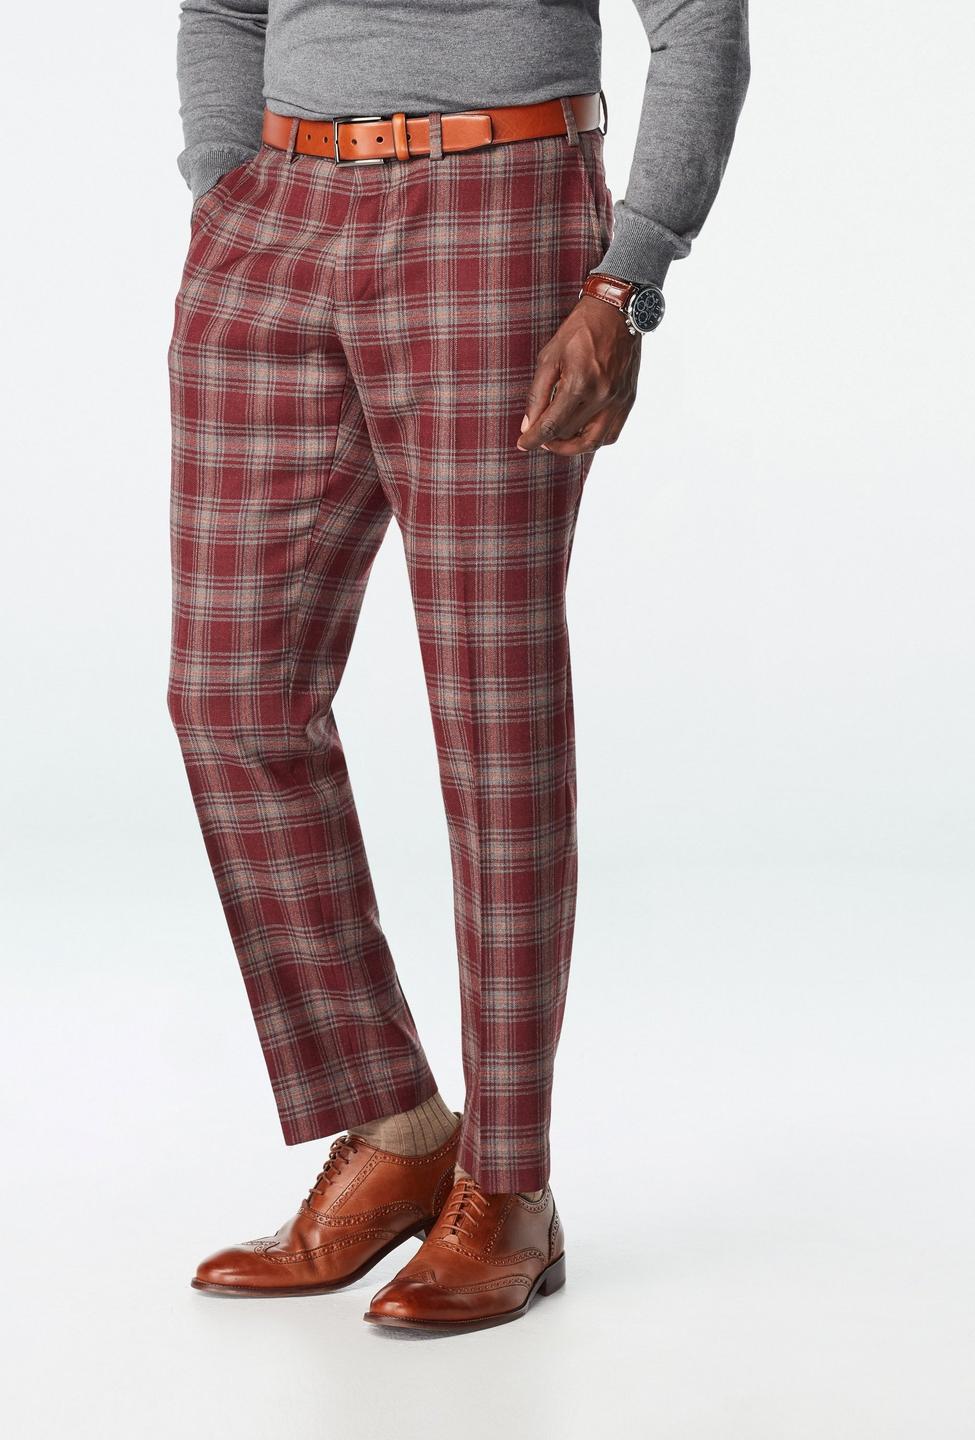 Red pants - Danhill Plaid Design from Seasonal Indochino Collection